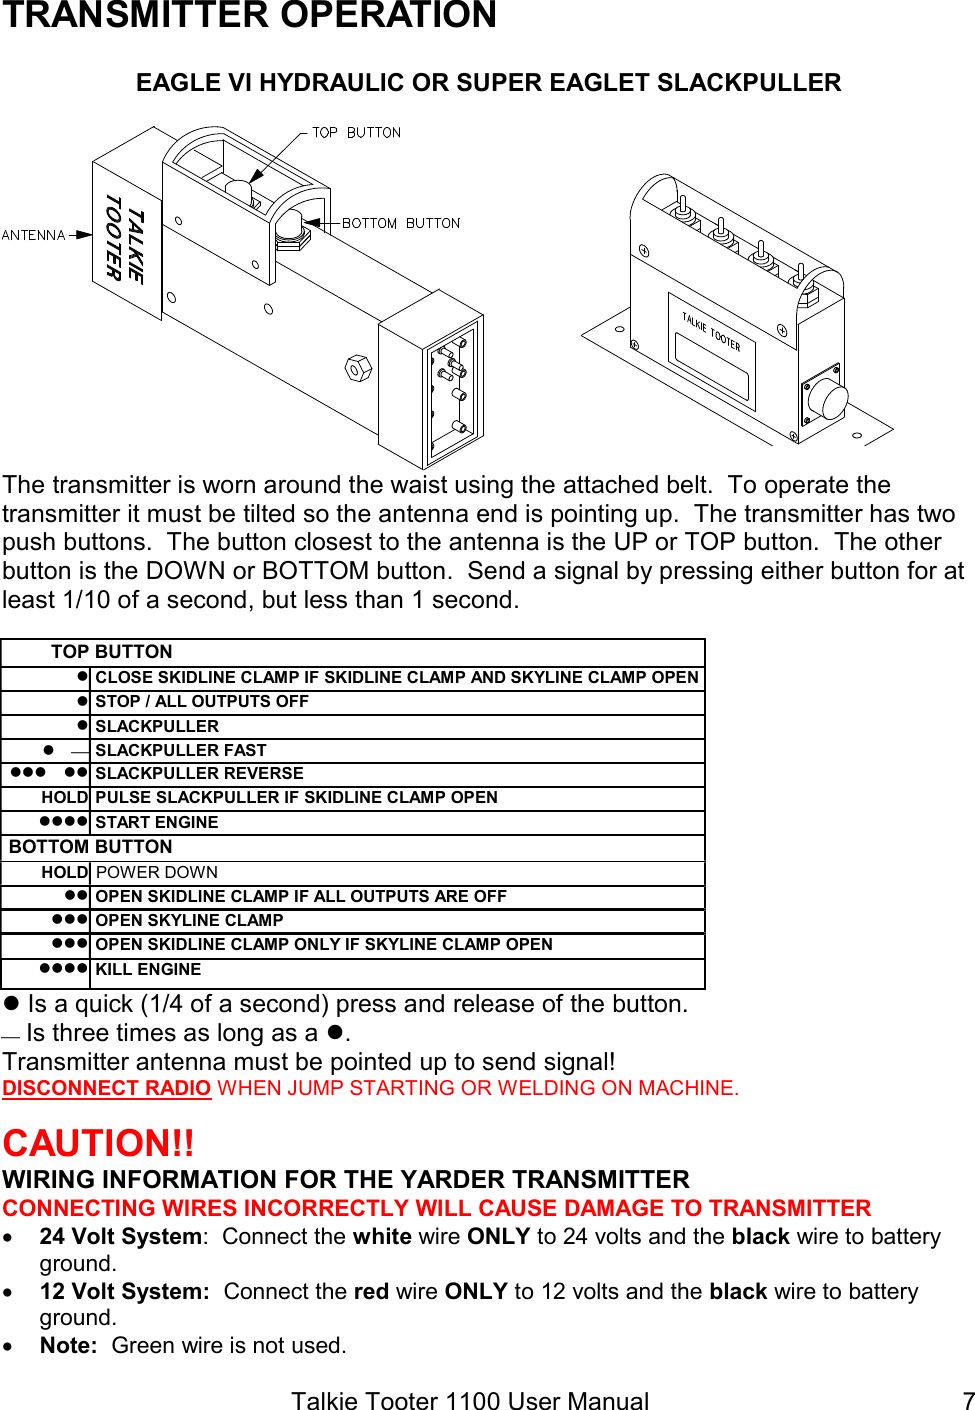 Talkie Tooter 1100 User Manual  7TRANSMITTER OPERATION EAGLE VI HYDRAULIC OR SUPER EAGLET SLACKPULLER  The transmitter is worn around the waist using the attached belt.  To operate the transmitter it must be tilted so the antenna end is pointing up.  The transmitter has two push buttons.  The button closest to the antenna is the UP or TOP button.  The other button is the DOWN or BOTTOM button.  Send a signal by pressing either button for at least 1/10 of a second, but less than 1 second.  TOP BUTTON  CLOSE SKIDLINE CLAMP IF SKIDLINE CLAMP AND SKYLINE CLAMP OPEN  STOP / ALL OUTPUTS OFF  SLACKPULLER   SLACKPULLER FAST    SLACKPULLER REVERSE HOLD PULSE SLACKPULLER IF SKIDLINE CLAMP OPEN   START ENGINE BOTTOM BUTTON HOLD POWER DOWN   OPEN SKIDLINE CLAMP IF ALL OUTPUTS ARE OFF   OPEN SKYLINE CLAMP   OPEN SKIDLINE CLAMP ONLY IF SKYLINE CLAMP OPEN   KILL ENGINE  Is a quick (1/4 of a second) press and release of the button.  Is three times as long as a . Transmitter antenna must be pointed up to send signal! DISCONNECT RADIO WHEN JUMP STARTING OR WELDING ON MACHINE.  CAUTION!!  WIRING INFORMATION FOR THE YARDER TRANSMITTER CONNECTING WIRES INCORRECTLY WILL CAUSE DAMAGE TO TRANSMITTER  24 Volt System:  Connect the white wire ONLY to 24 volts and the black wire to battery ground.  12 Volt System:  Connect the red wire ONLY to 12 volts and the black wire to battery ground.  Note:  Green wire is not used. 